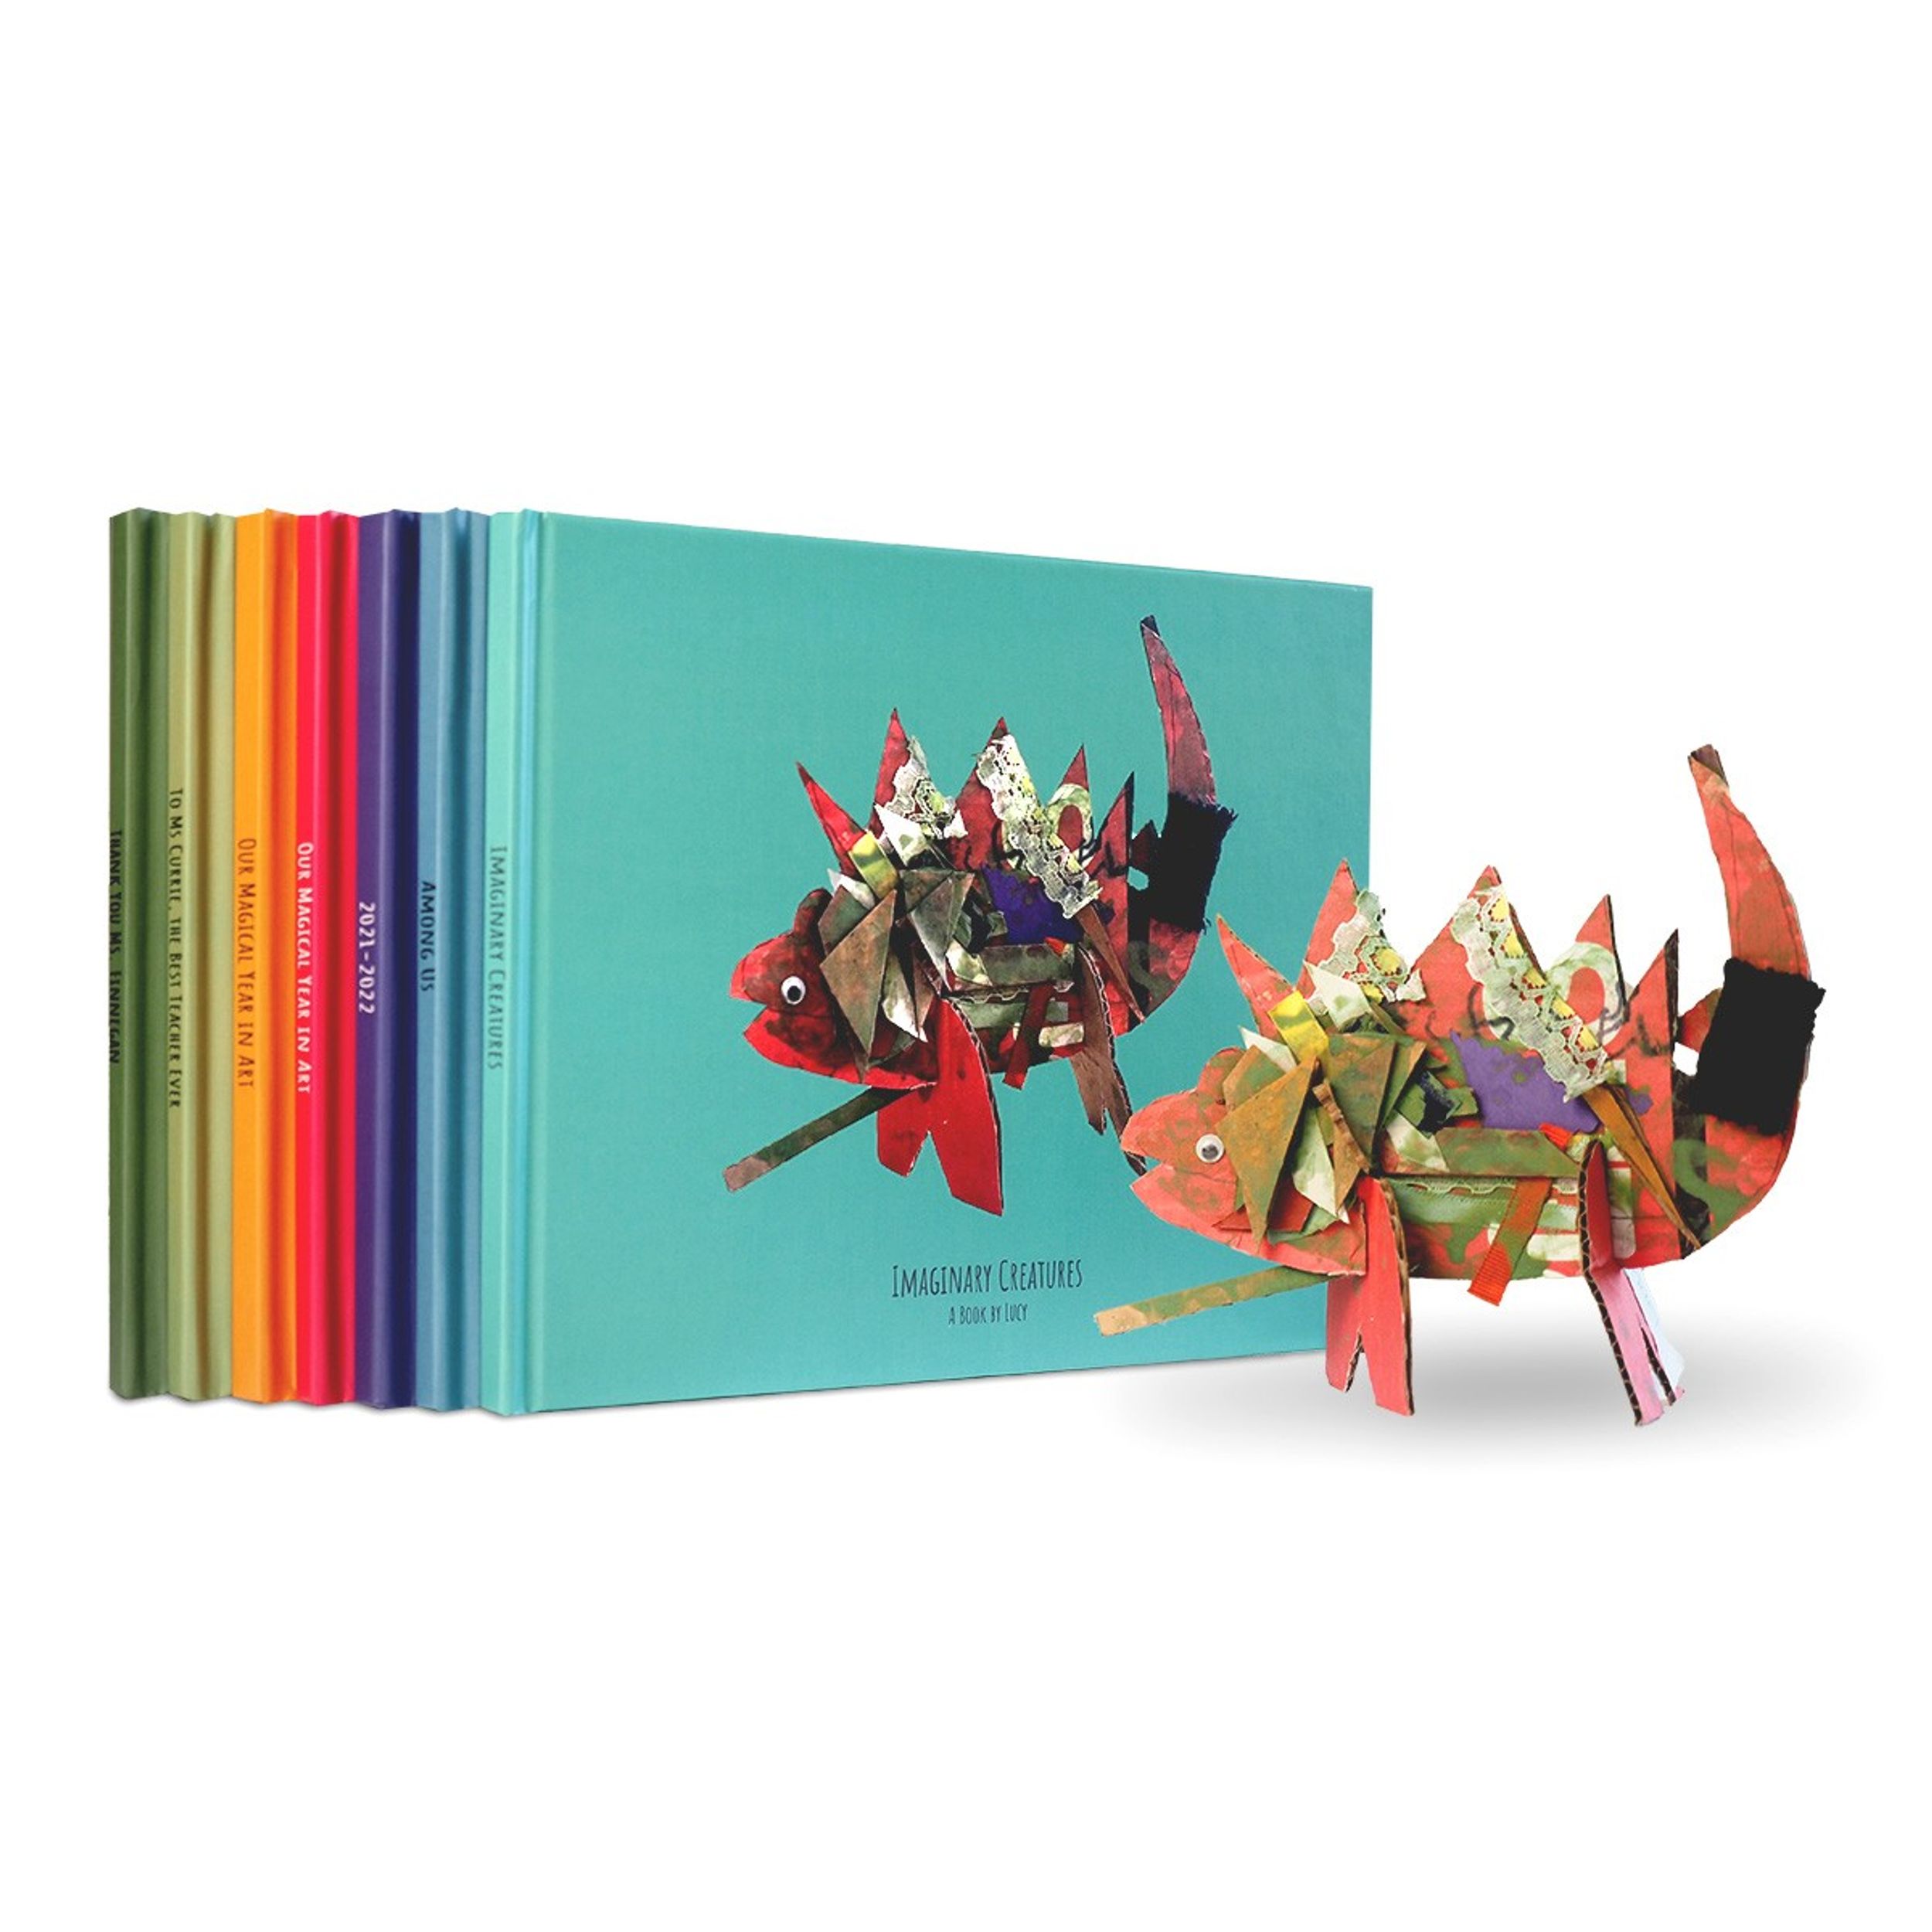 A stack of colorful Scribble books highlighting 3D dinosaur